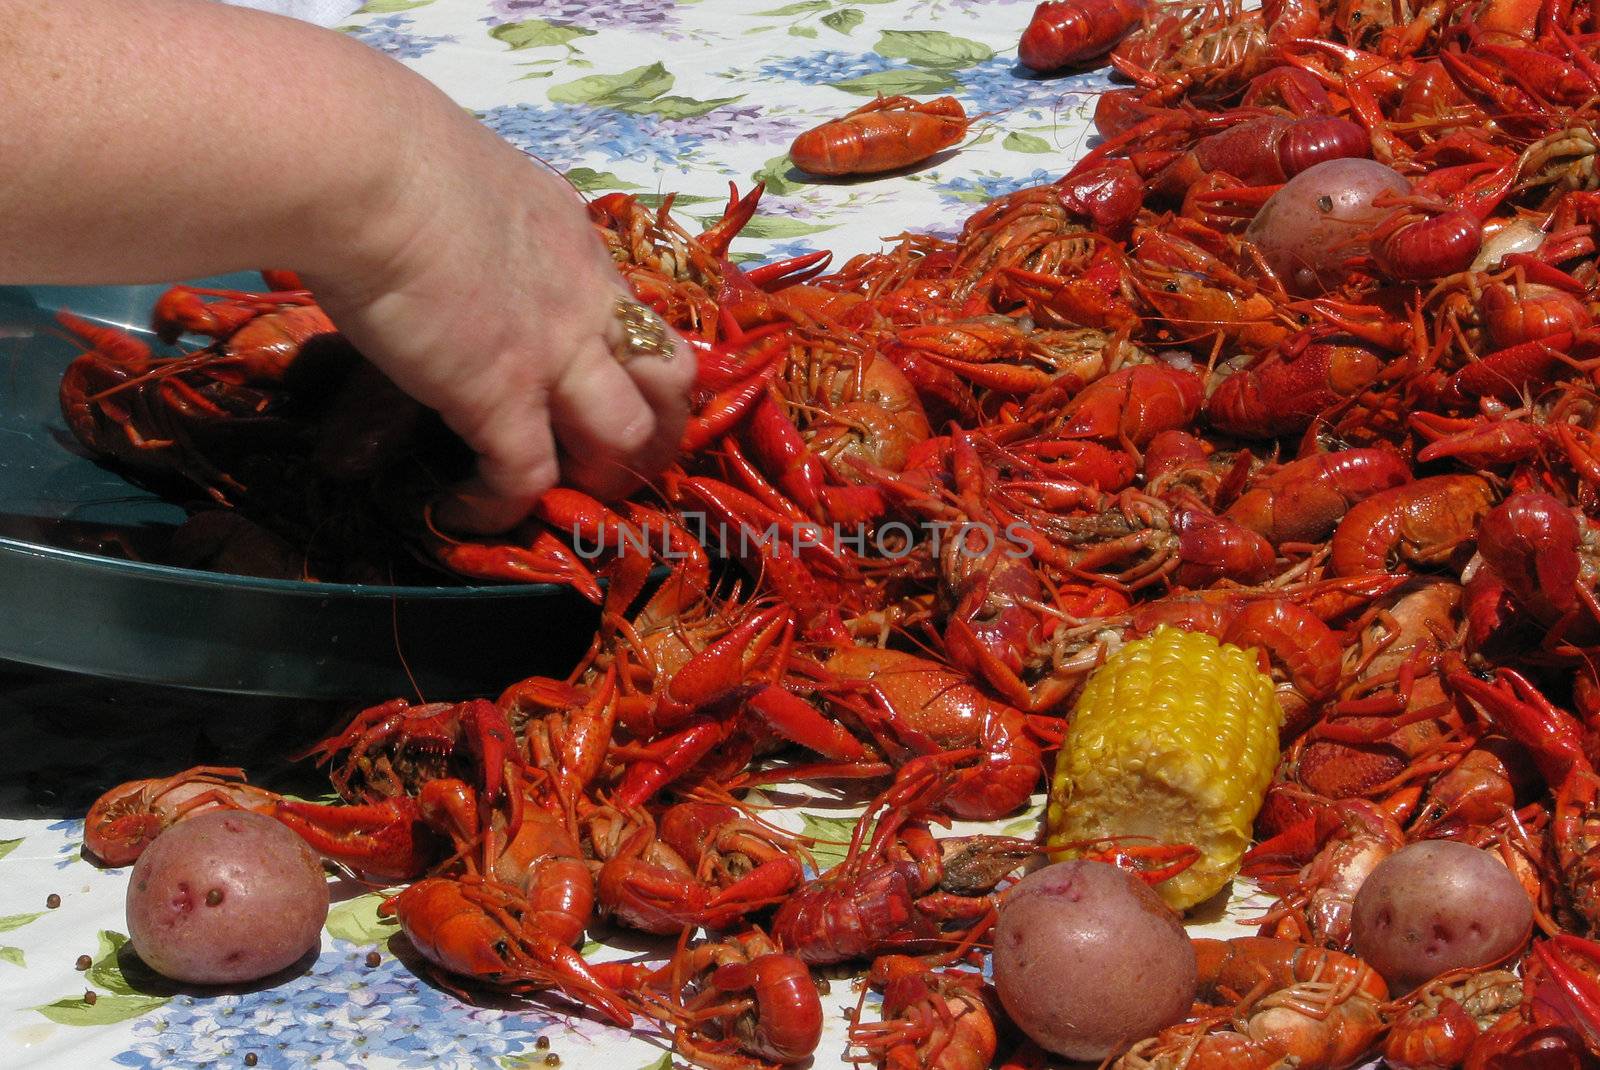 Crawfish being put on a plastic platter tray.